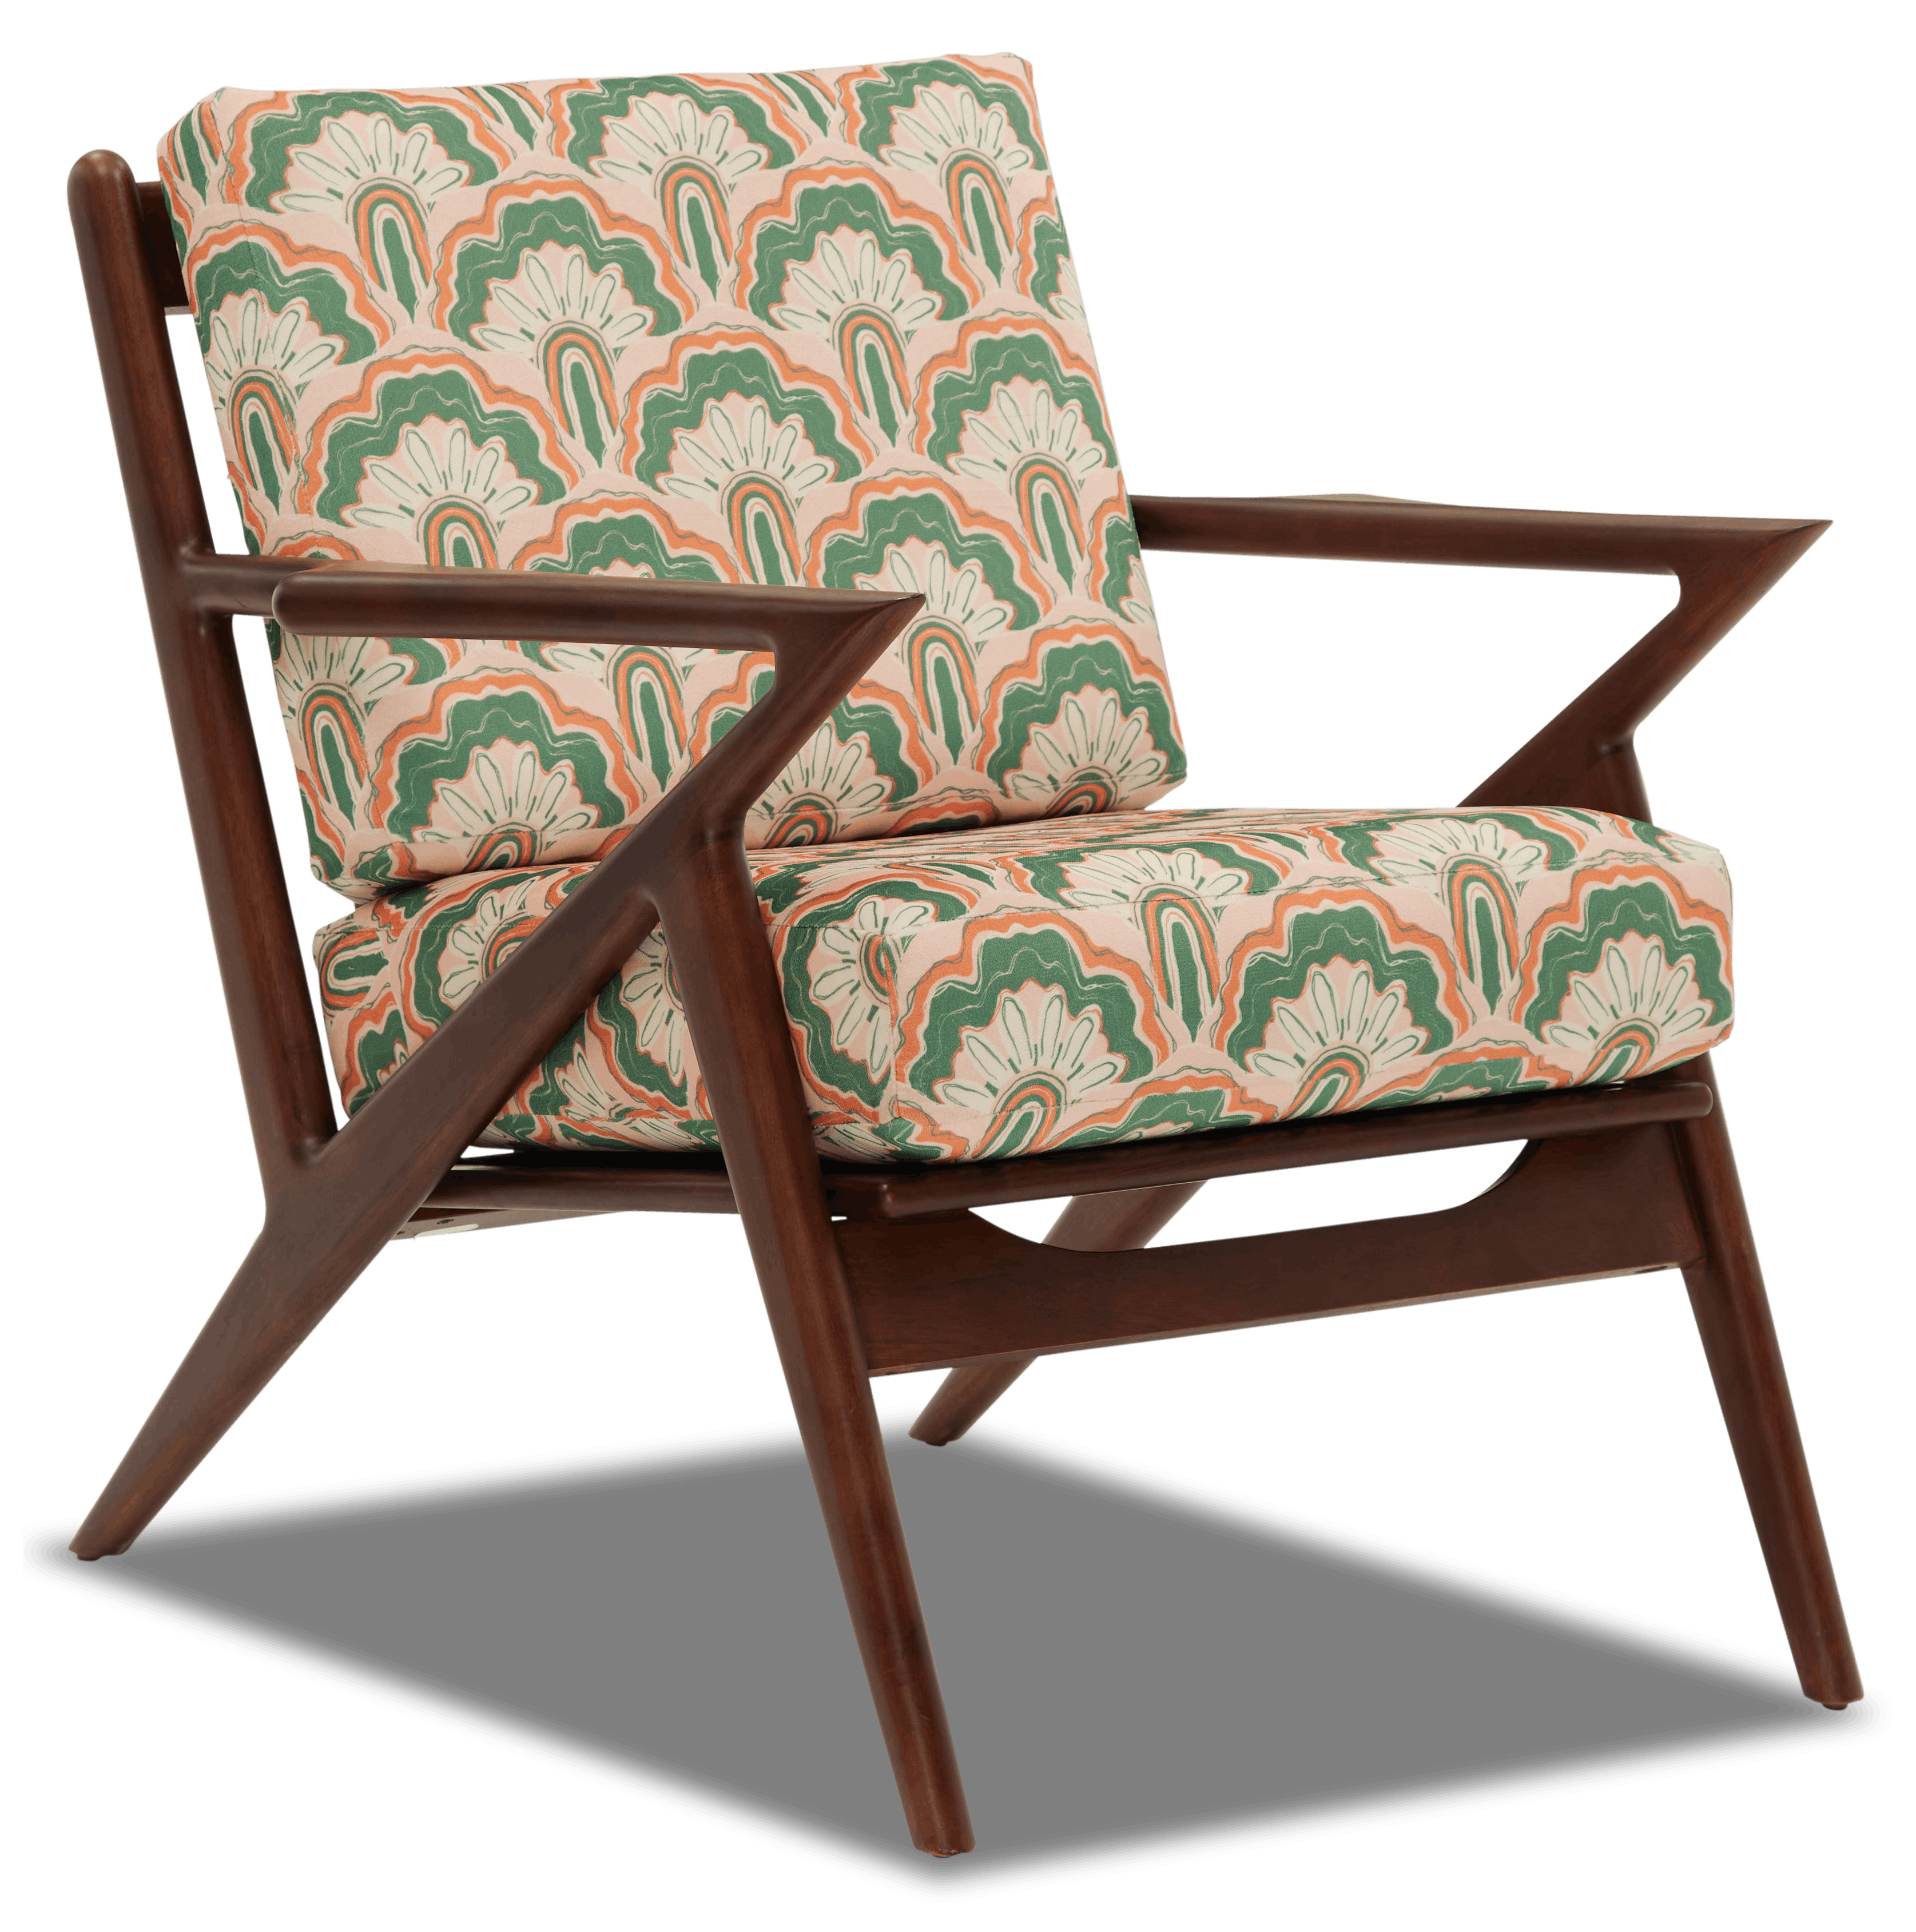 deco peacock soto chair %28limited edition%29 deco peacock